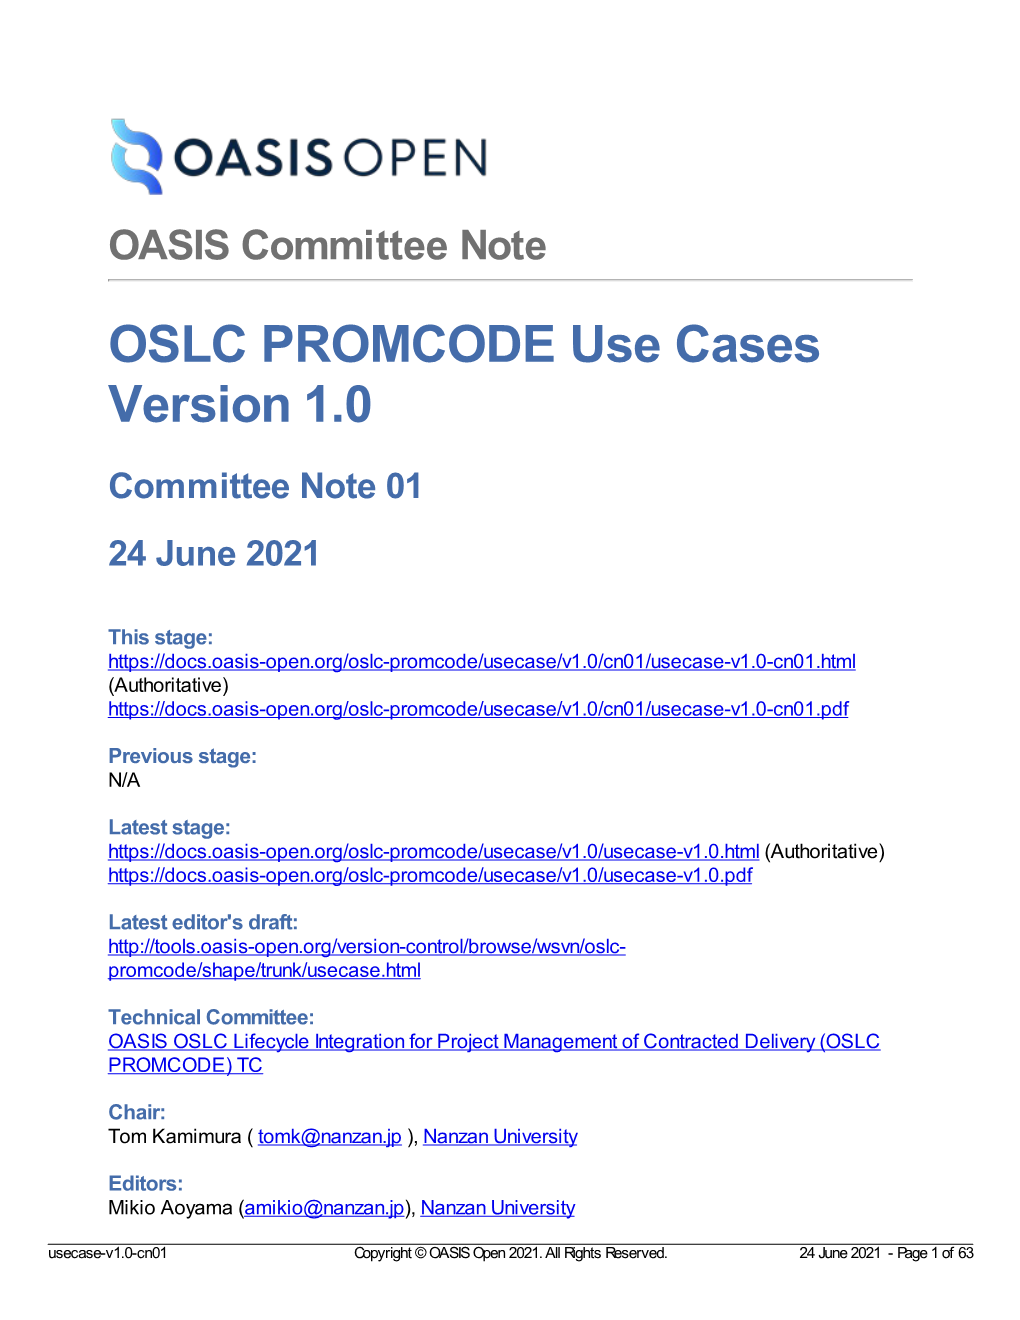 OSLC PROMCODE Use Cases Version 1.0 Committee Note 01 24 June 2021